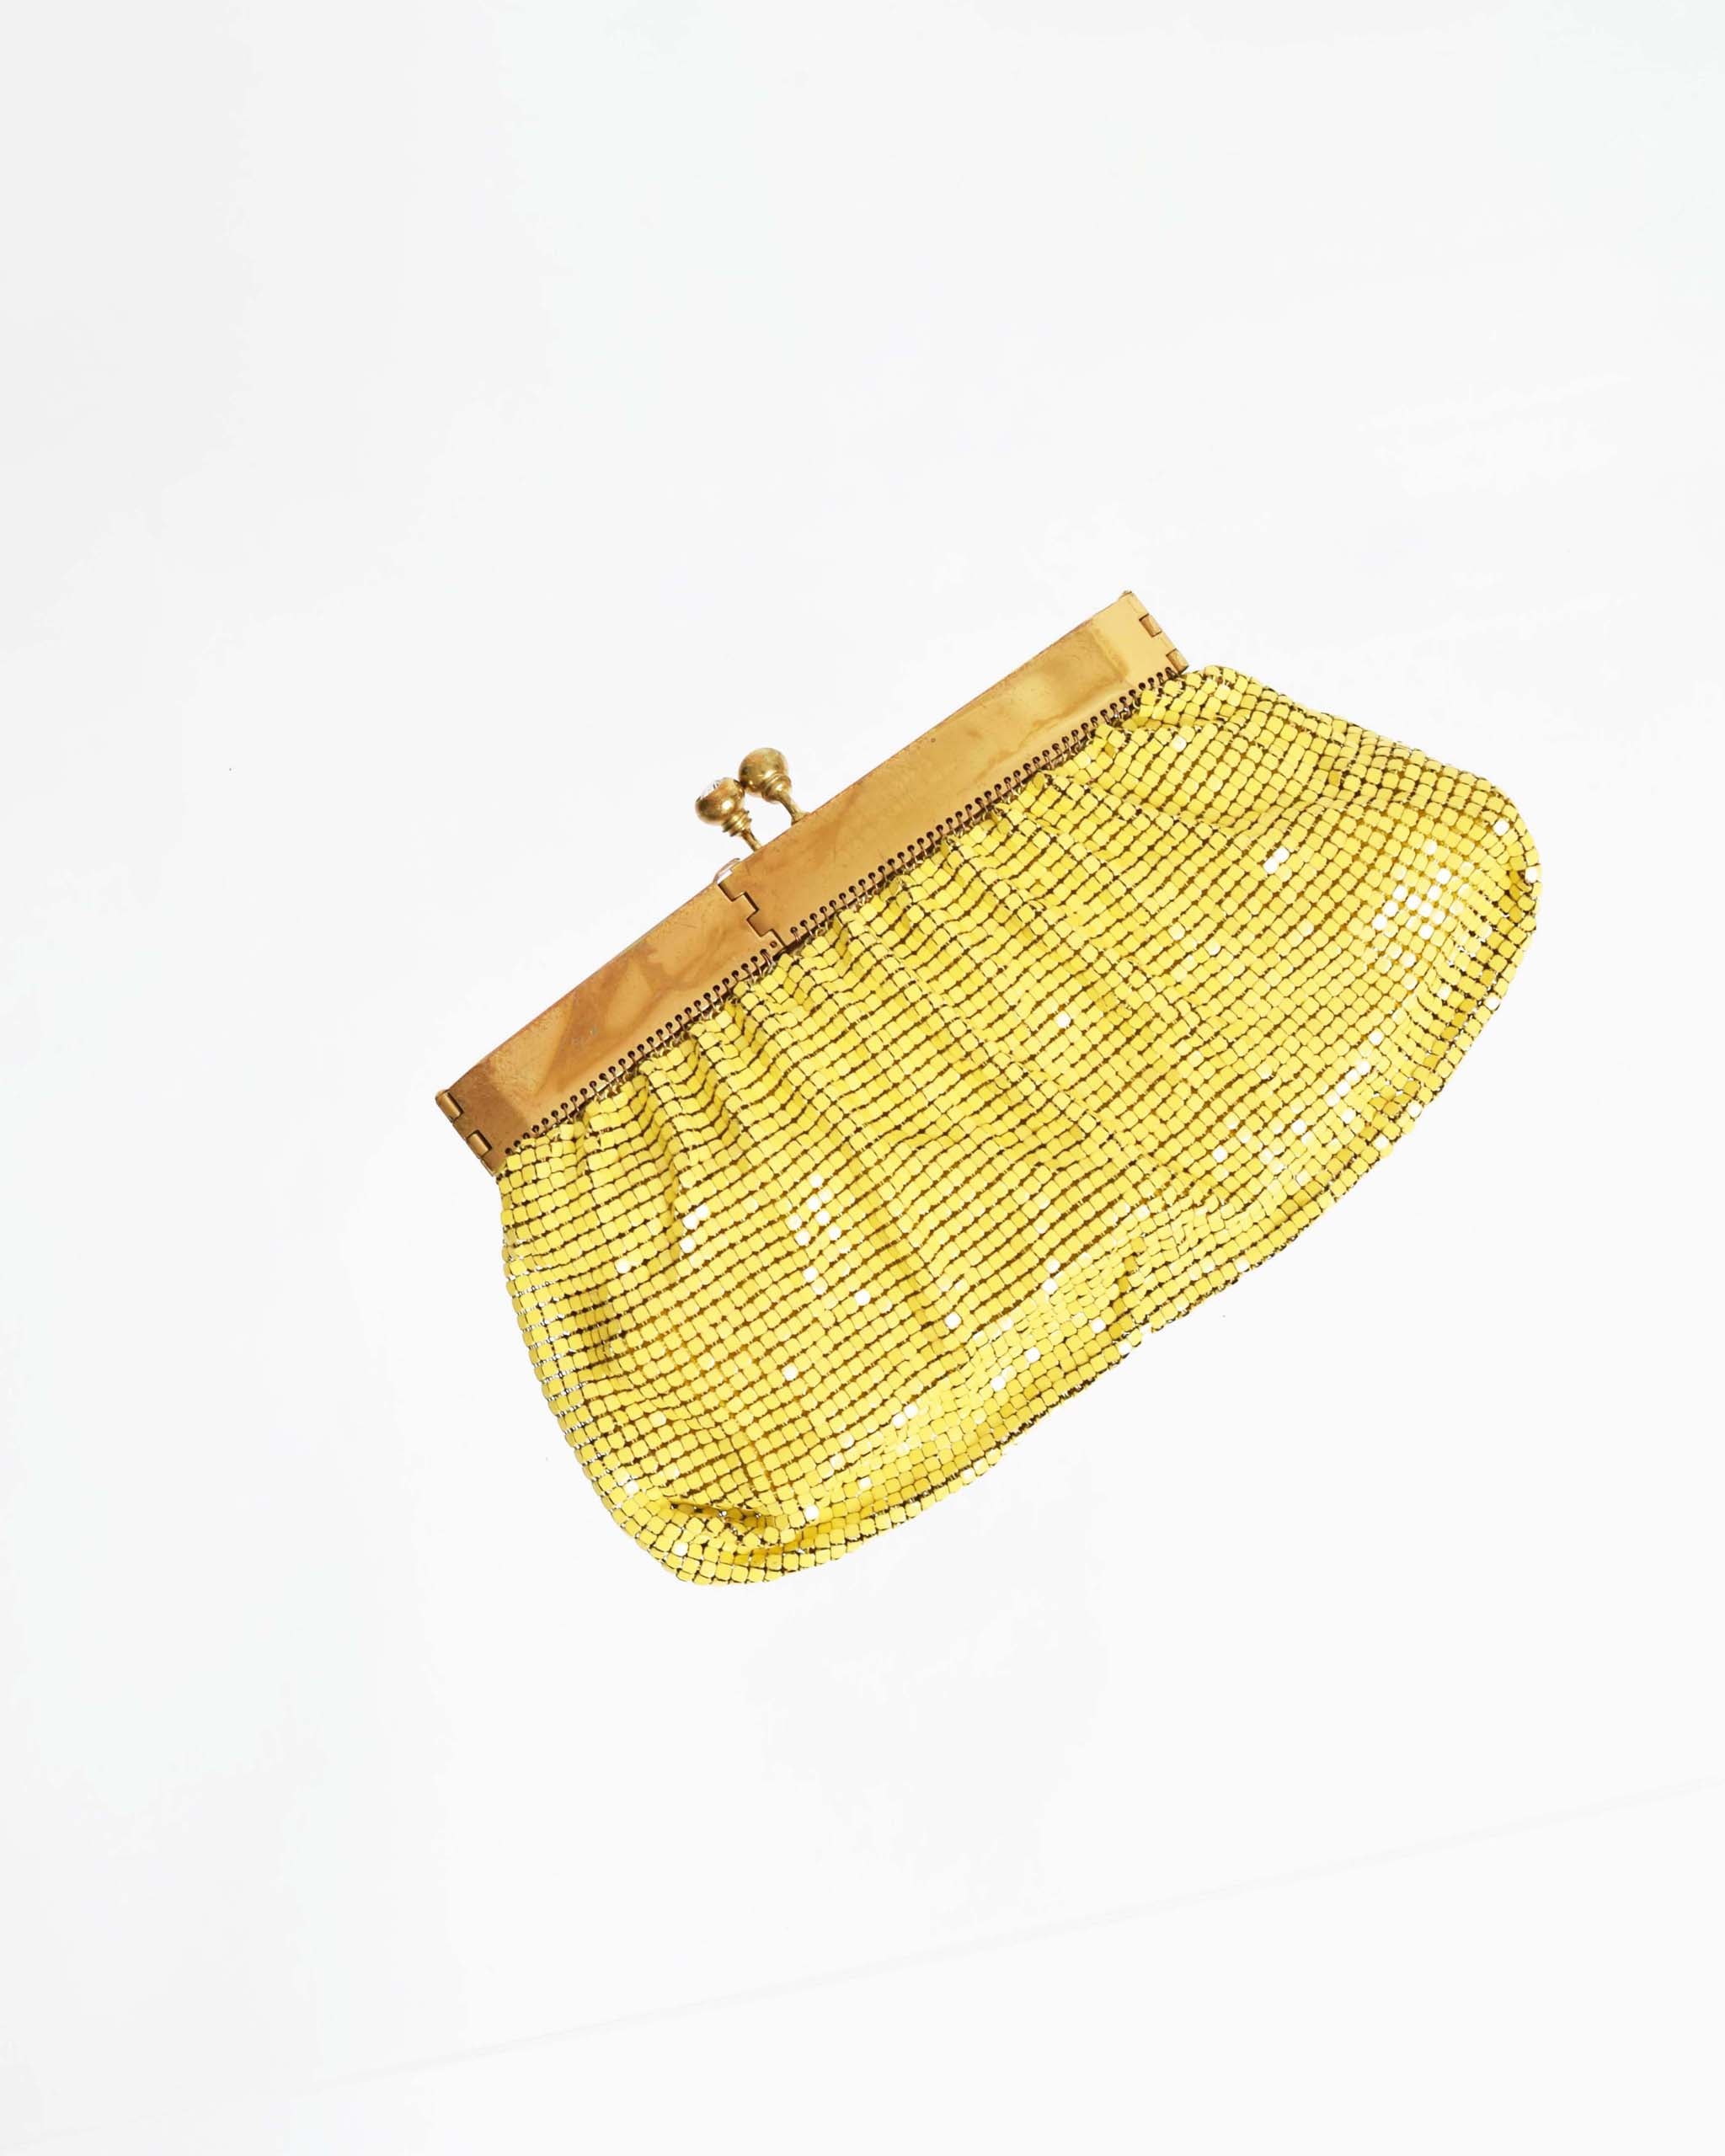 Vintage Chainmail Coin Purse